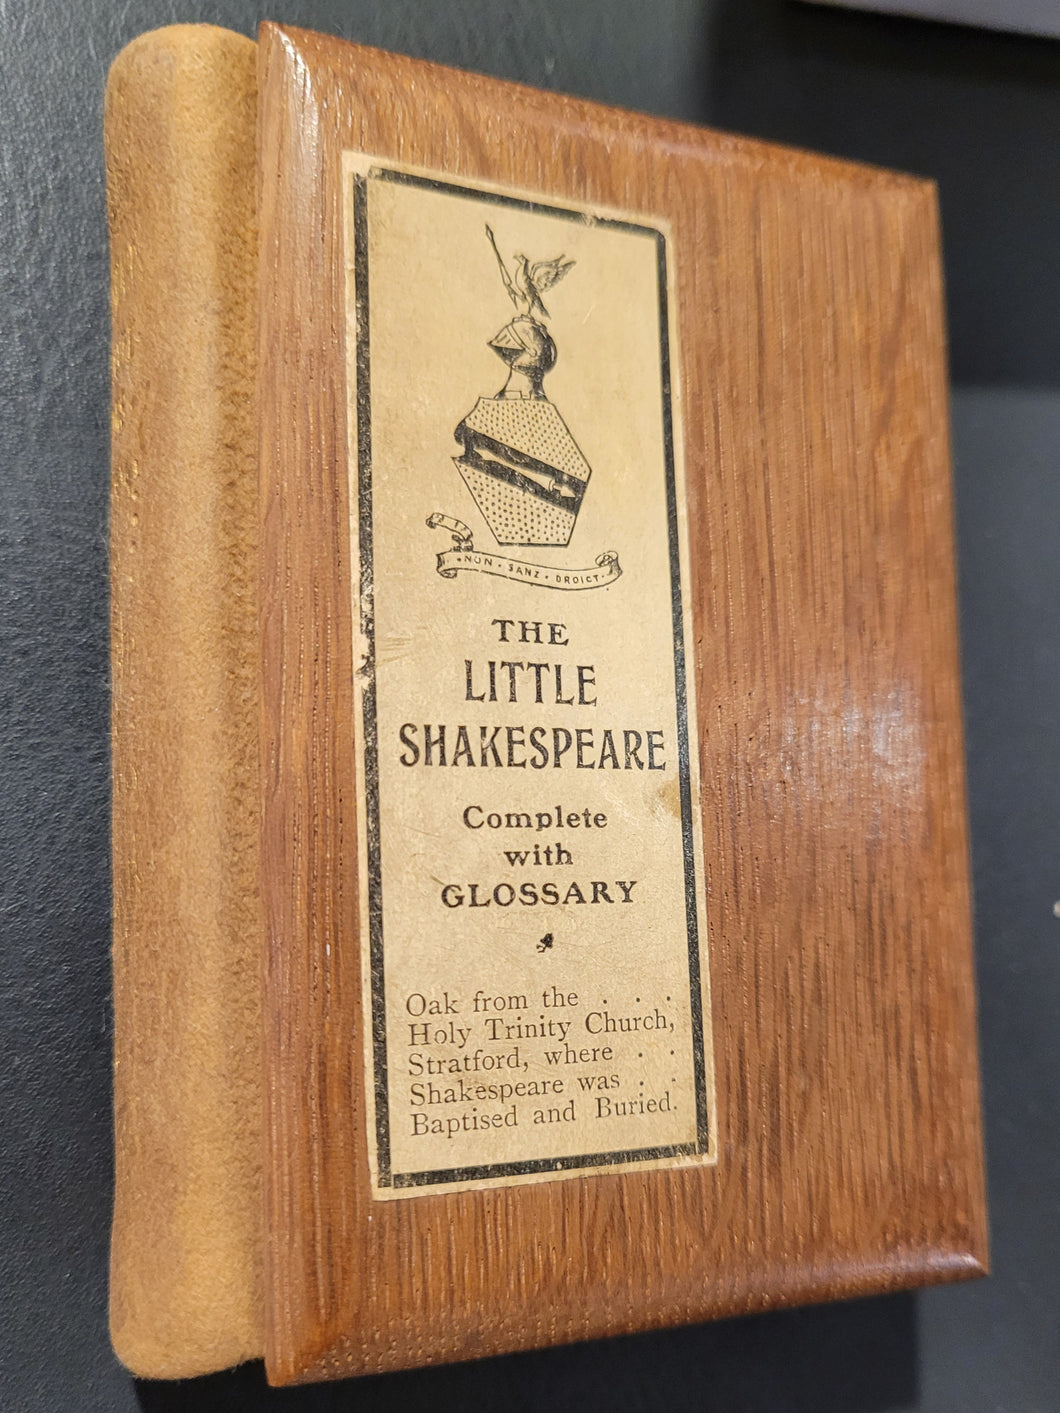 The Little Shakespeare-Complete with Glossary. c1908.